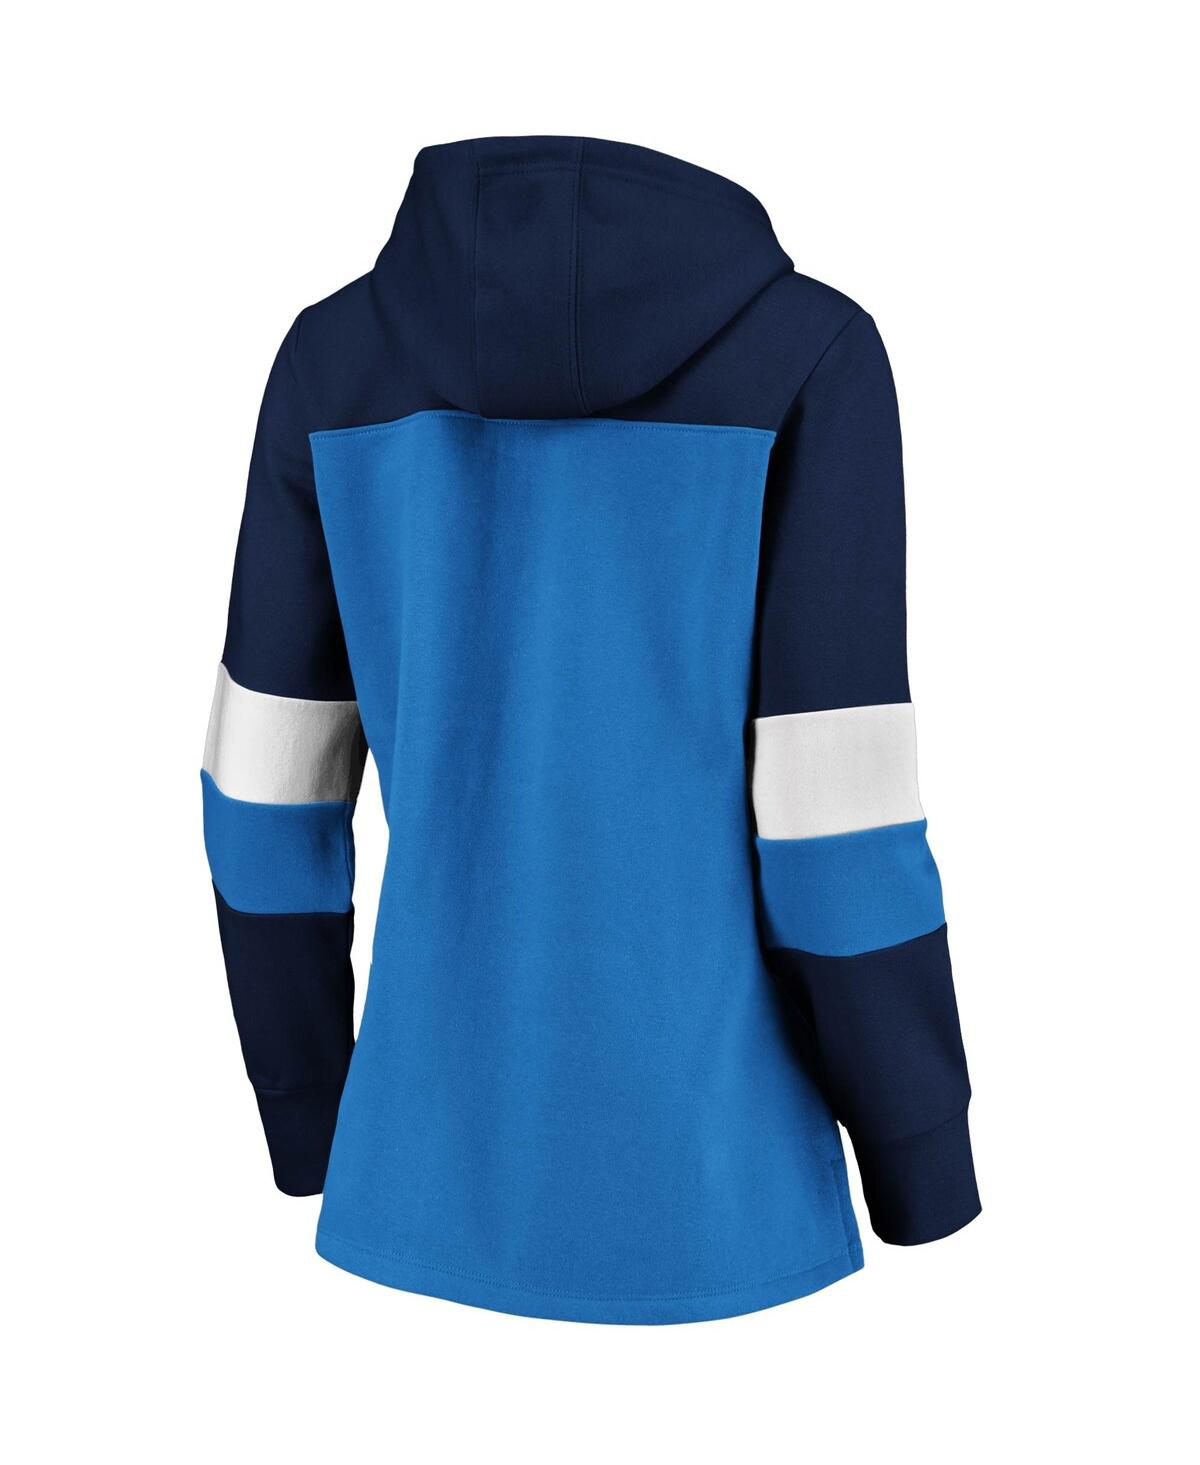 Profile Navy Detroit Tigers Plus Size Colorblock Pullover Hoodie